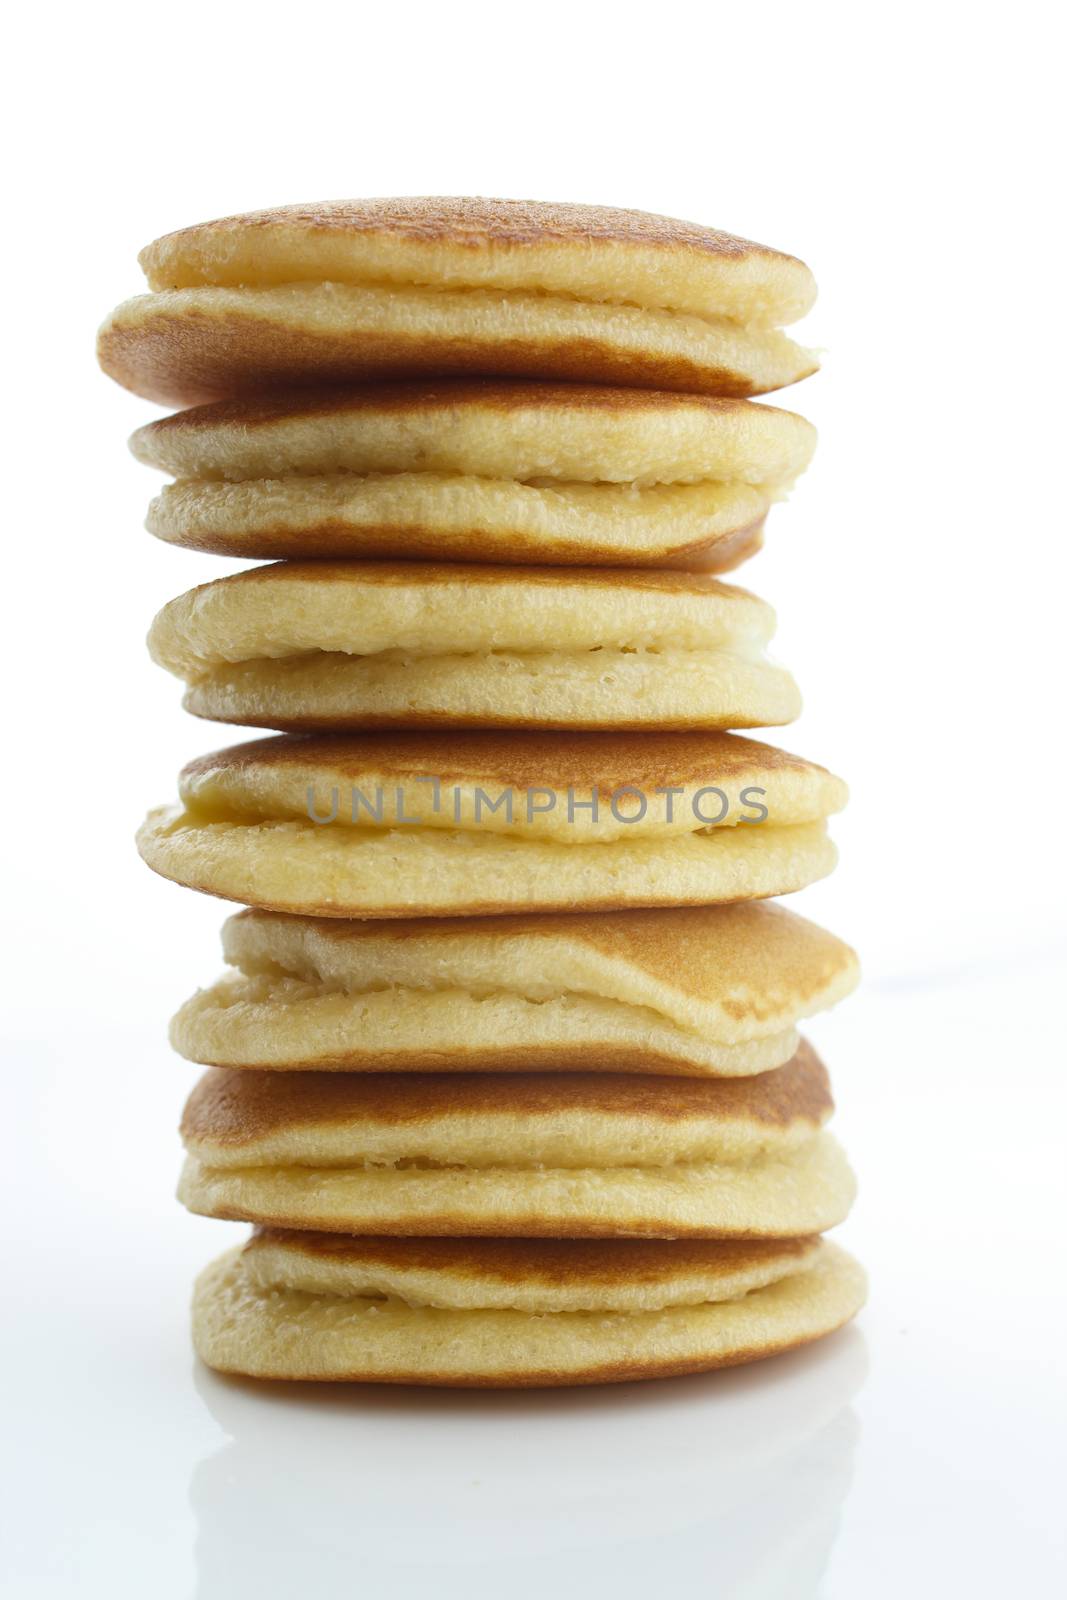 A stack of plain pancakes on a white background